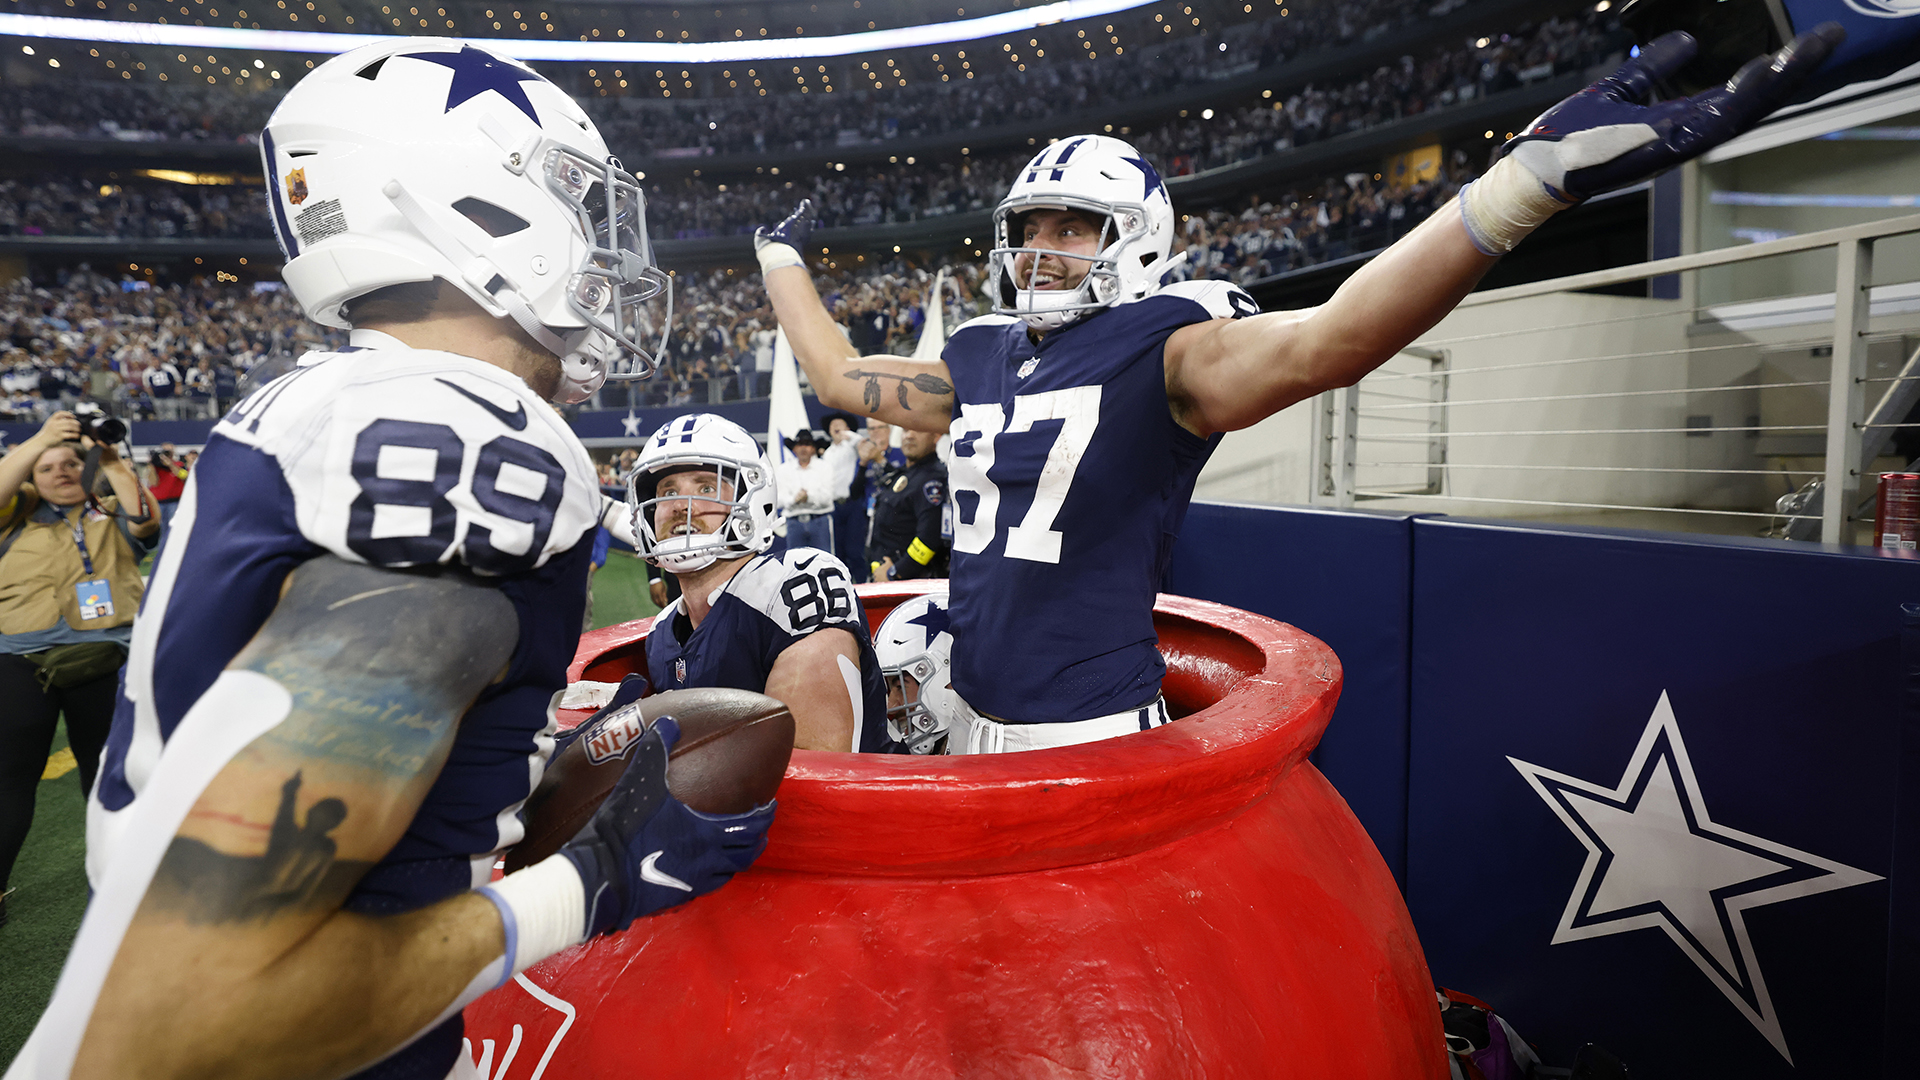 Prescott, TEs help Cowboys to Thanksgiving win over Giants